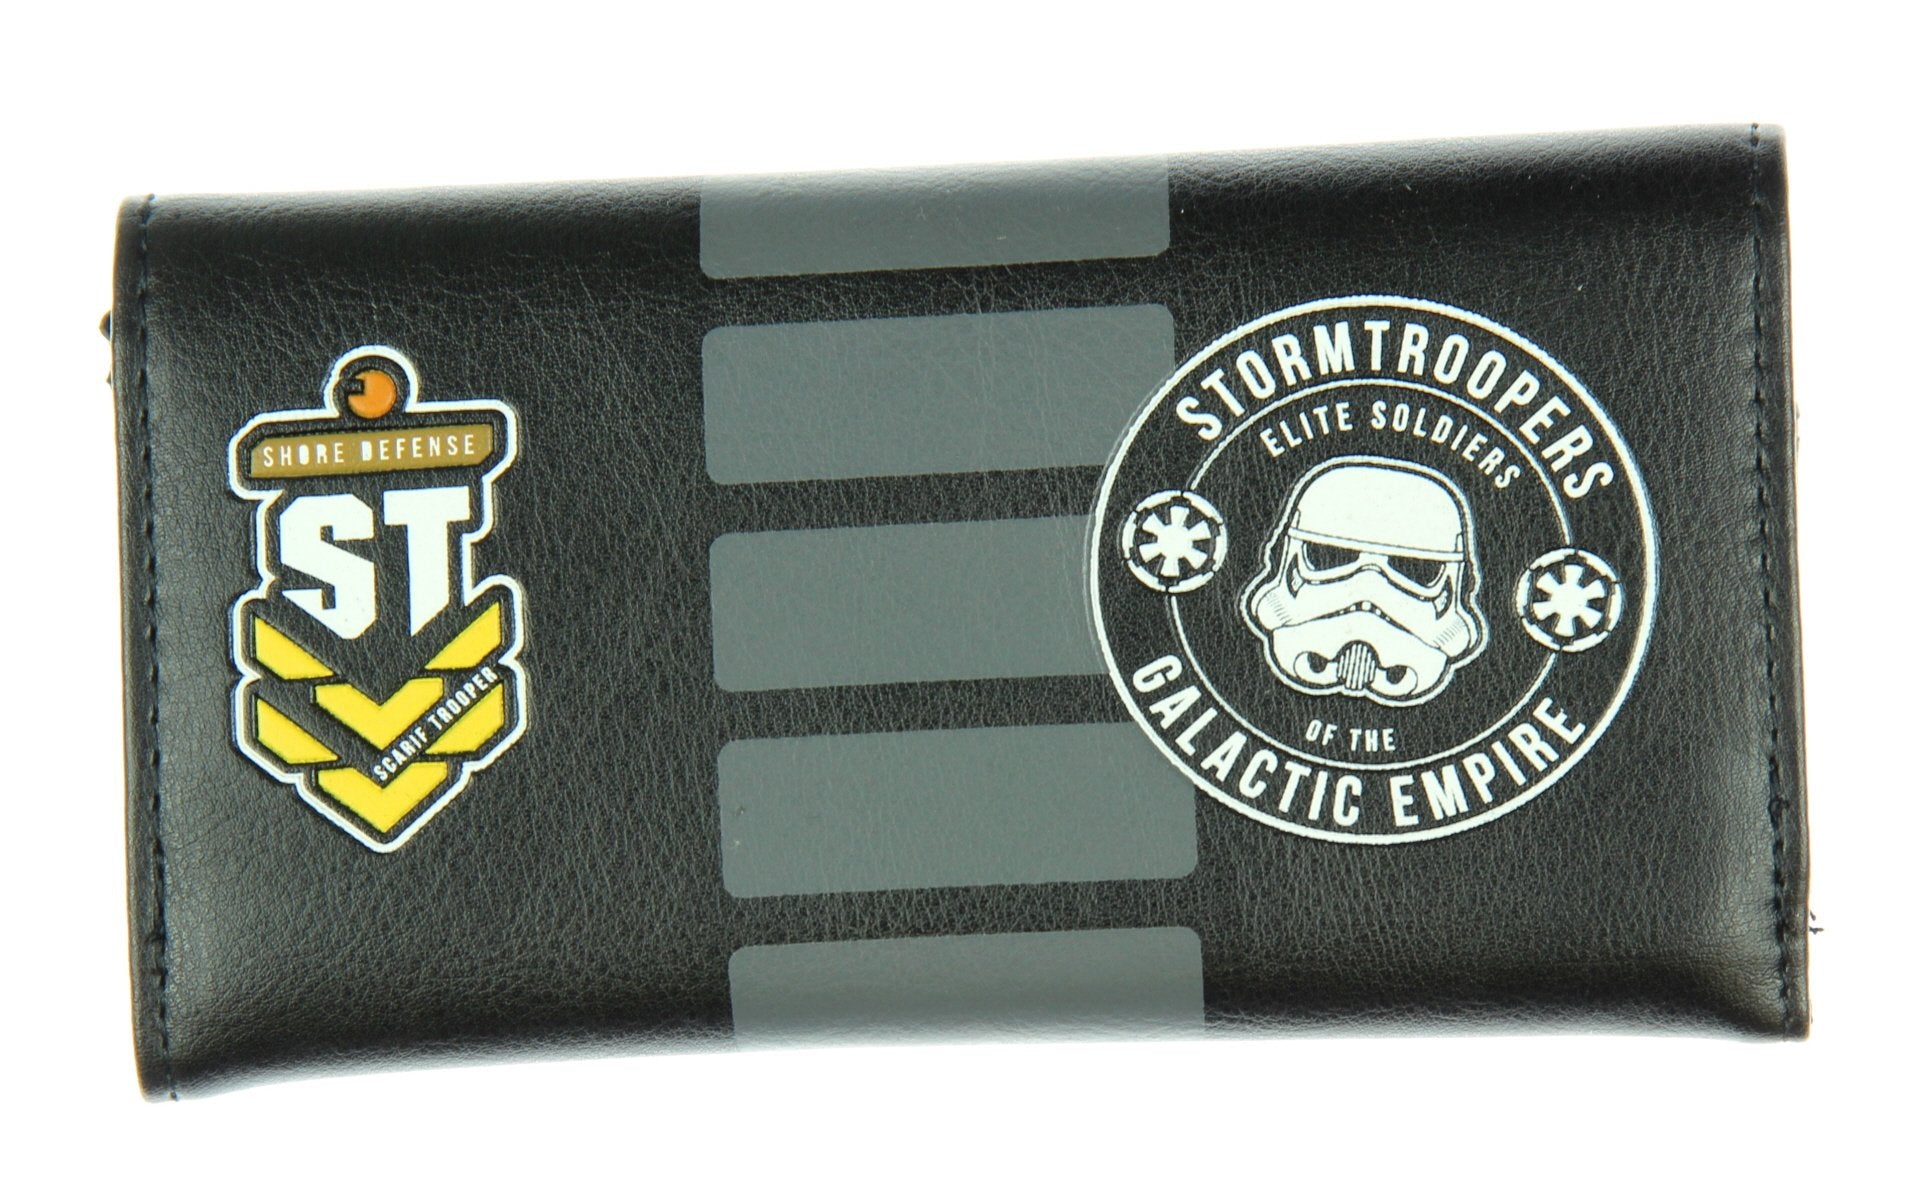 Back view of Star Wars Rogue One flap wallet with Empire insignia and sleek black design.